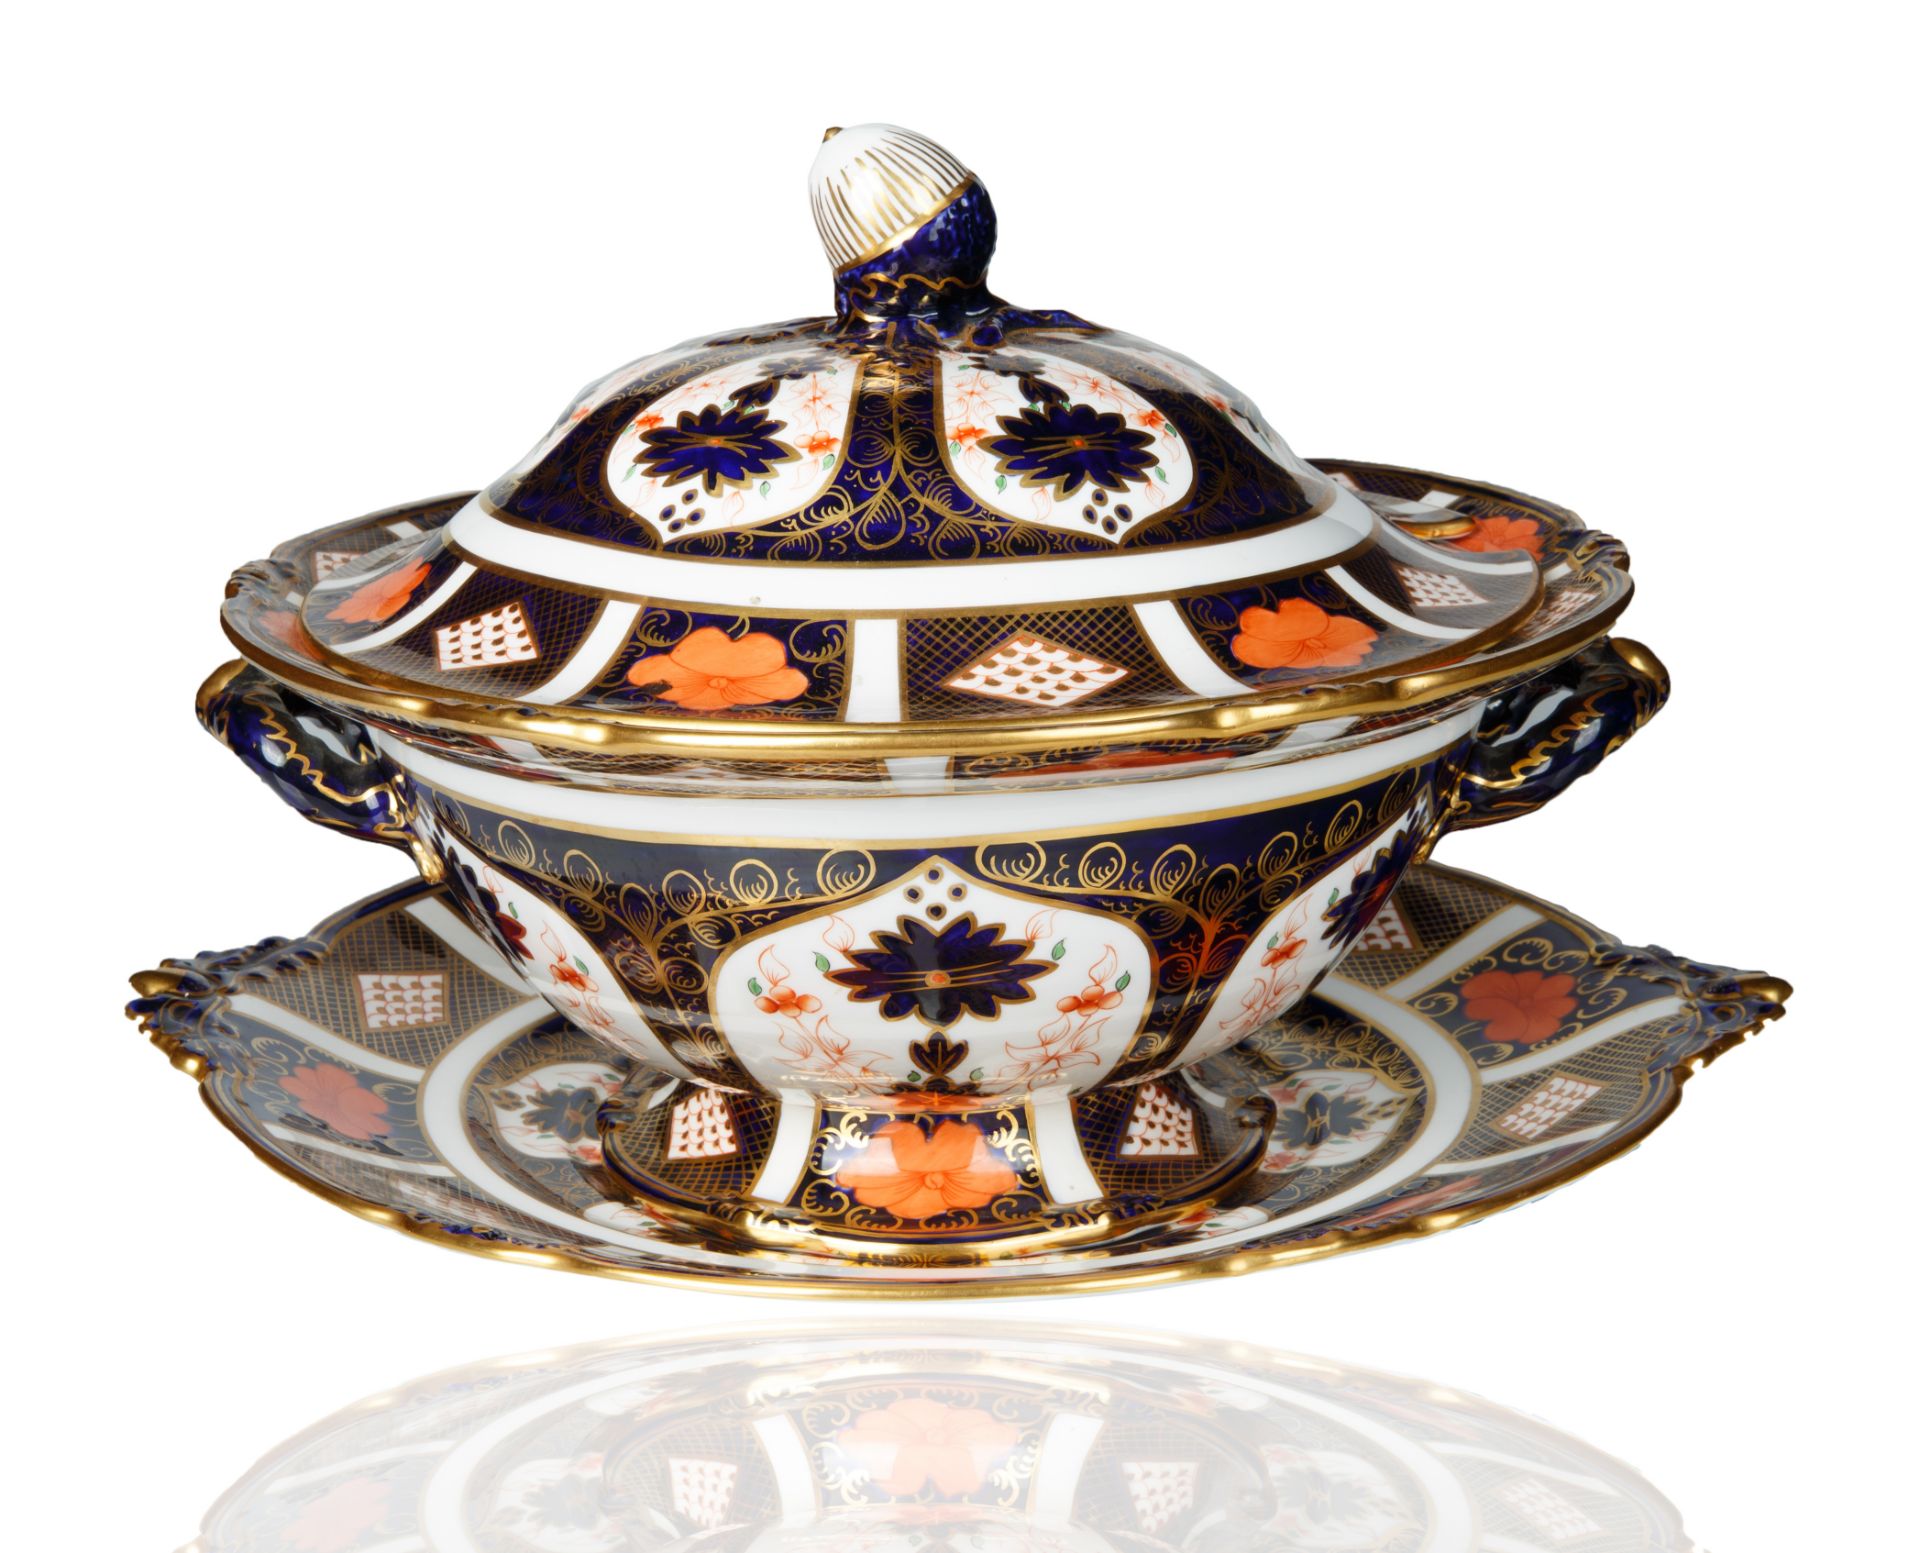 A ROYAL CROWN DERBY PORCELAIN COVERED DISH AND PLATTER IN TRADITIONAL IMARI PATTERN, CIRCA 1921-1965